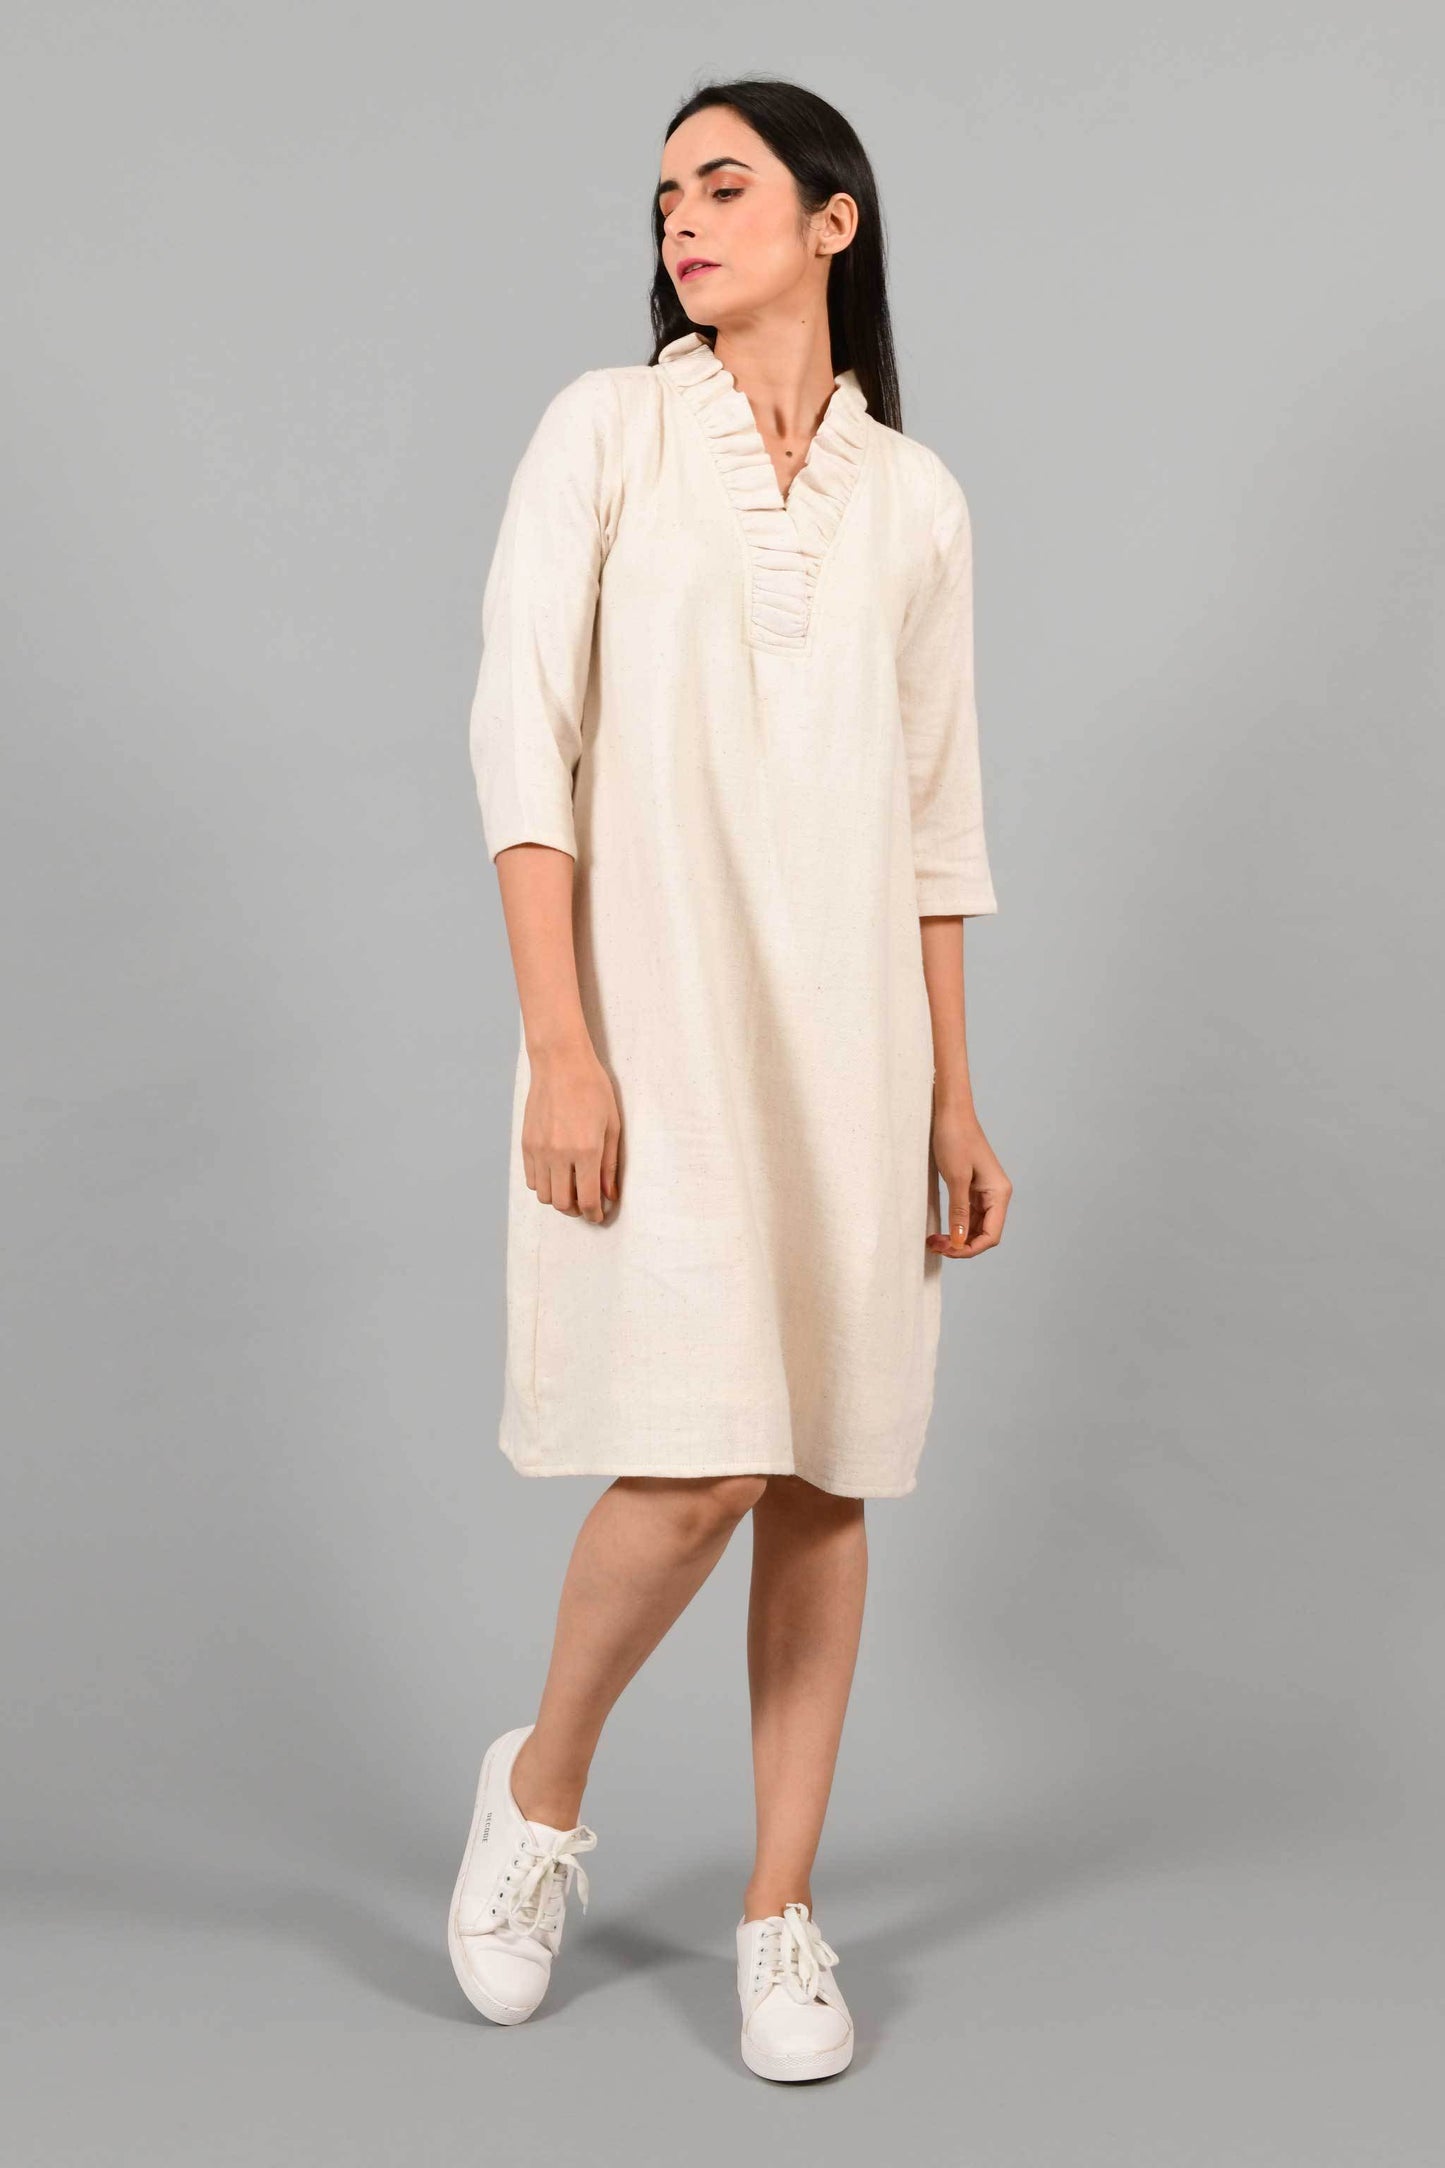 Stylised front pose of an Indian female womenswear fashion model in an off-white Cashmere Cotton Dress with flared neck, made using handspun and handwoven khadi cotton by Cotton Rack.